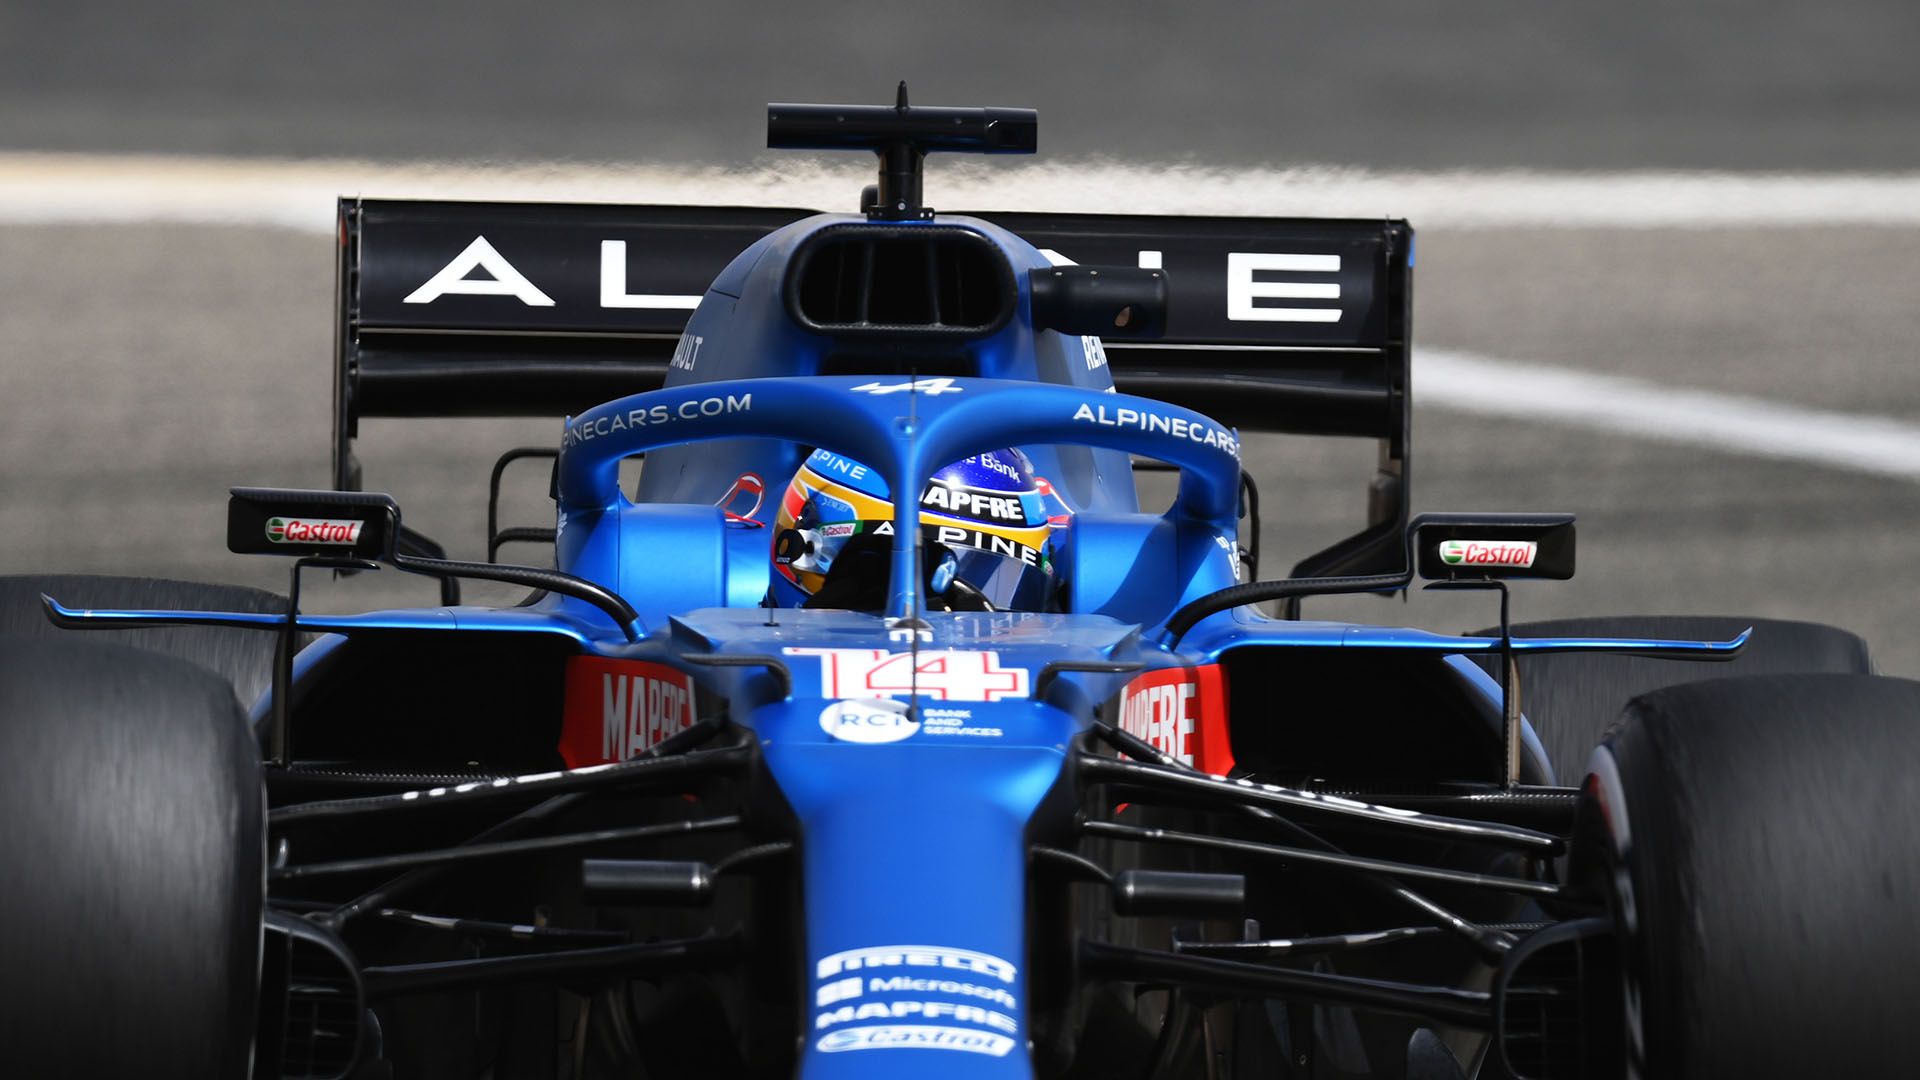 Alpine Explain The Thinking Behind Their Eye Catchingly Wide Airbox Design. Formula 1®